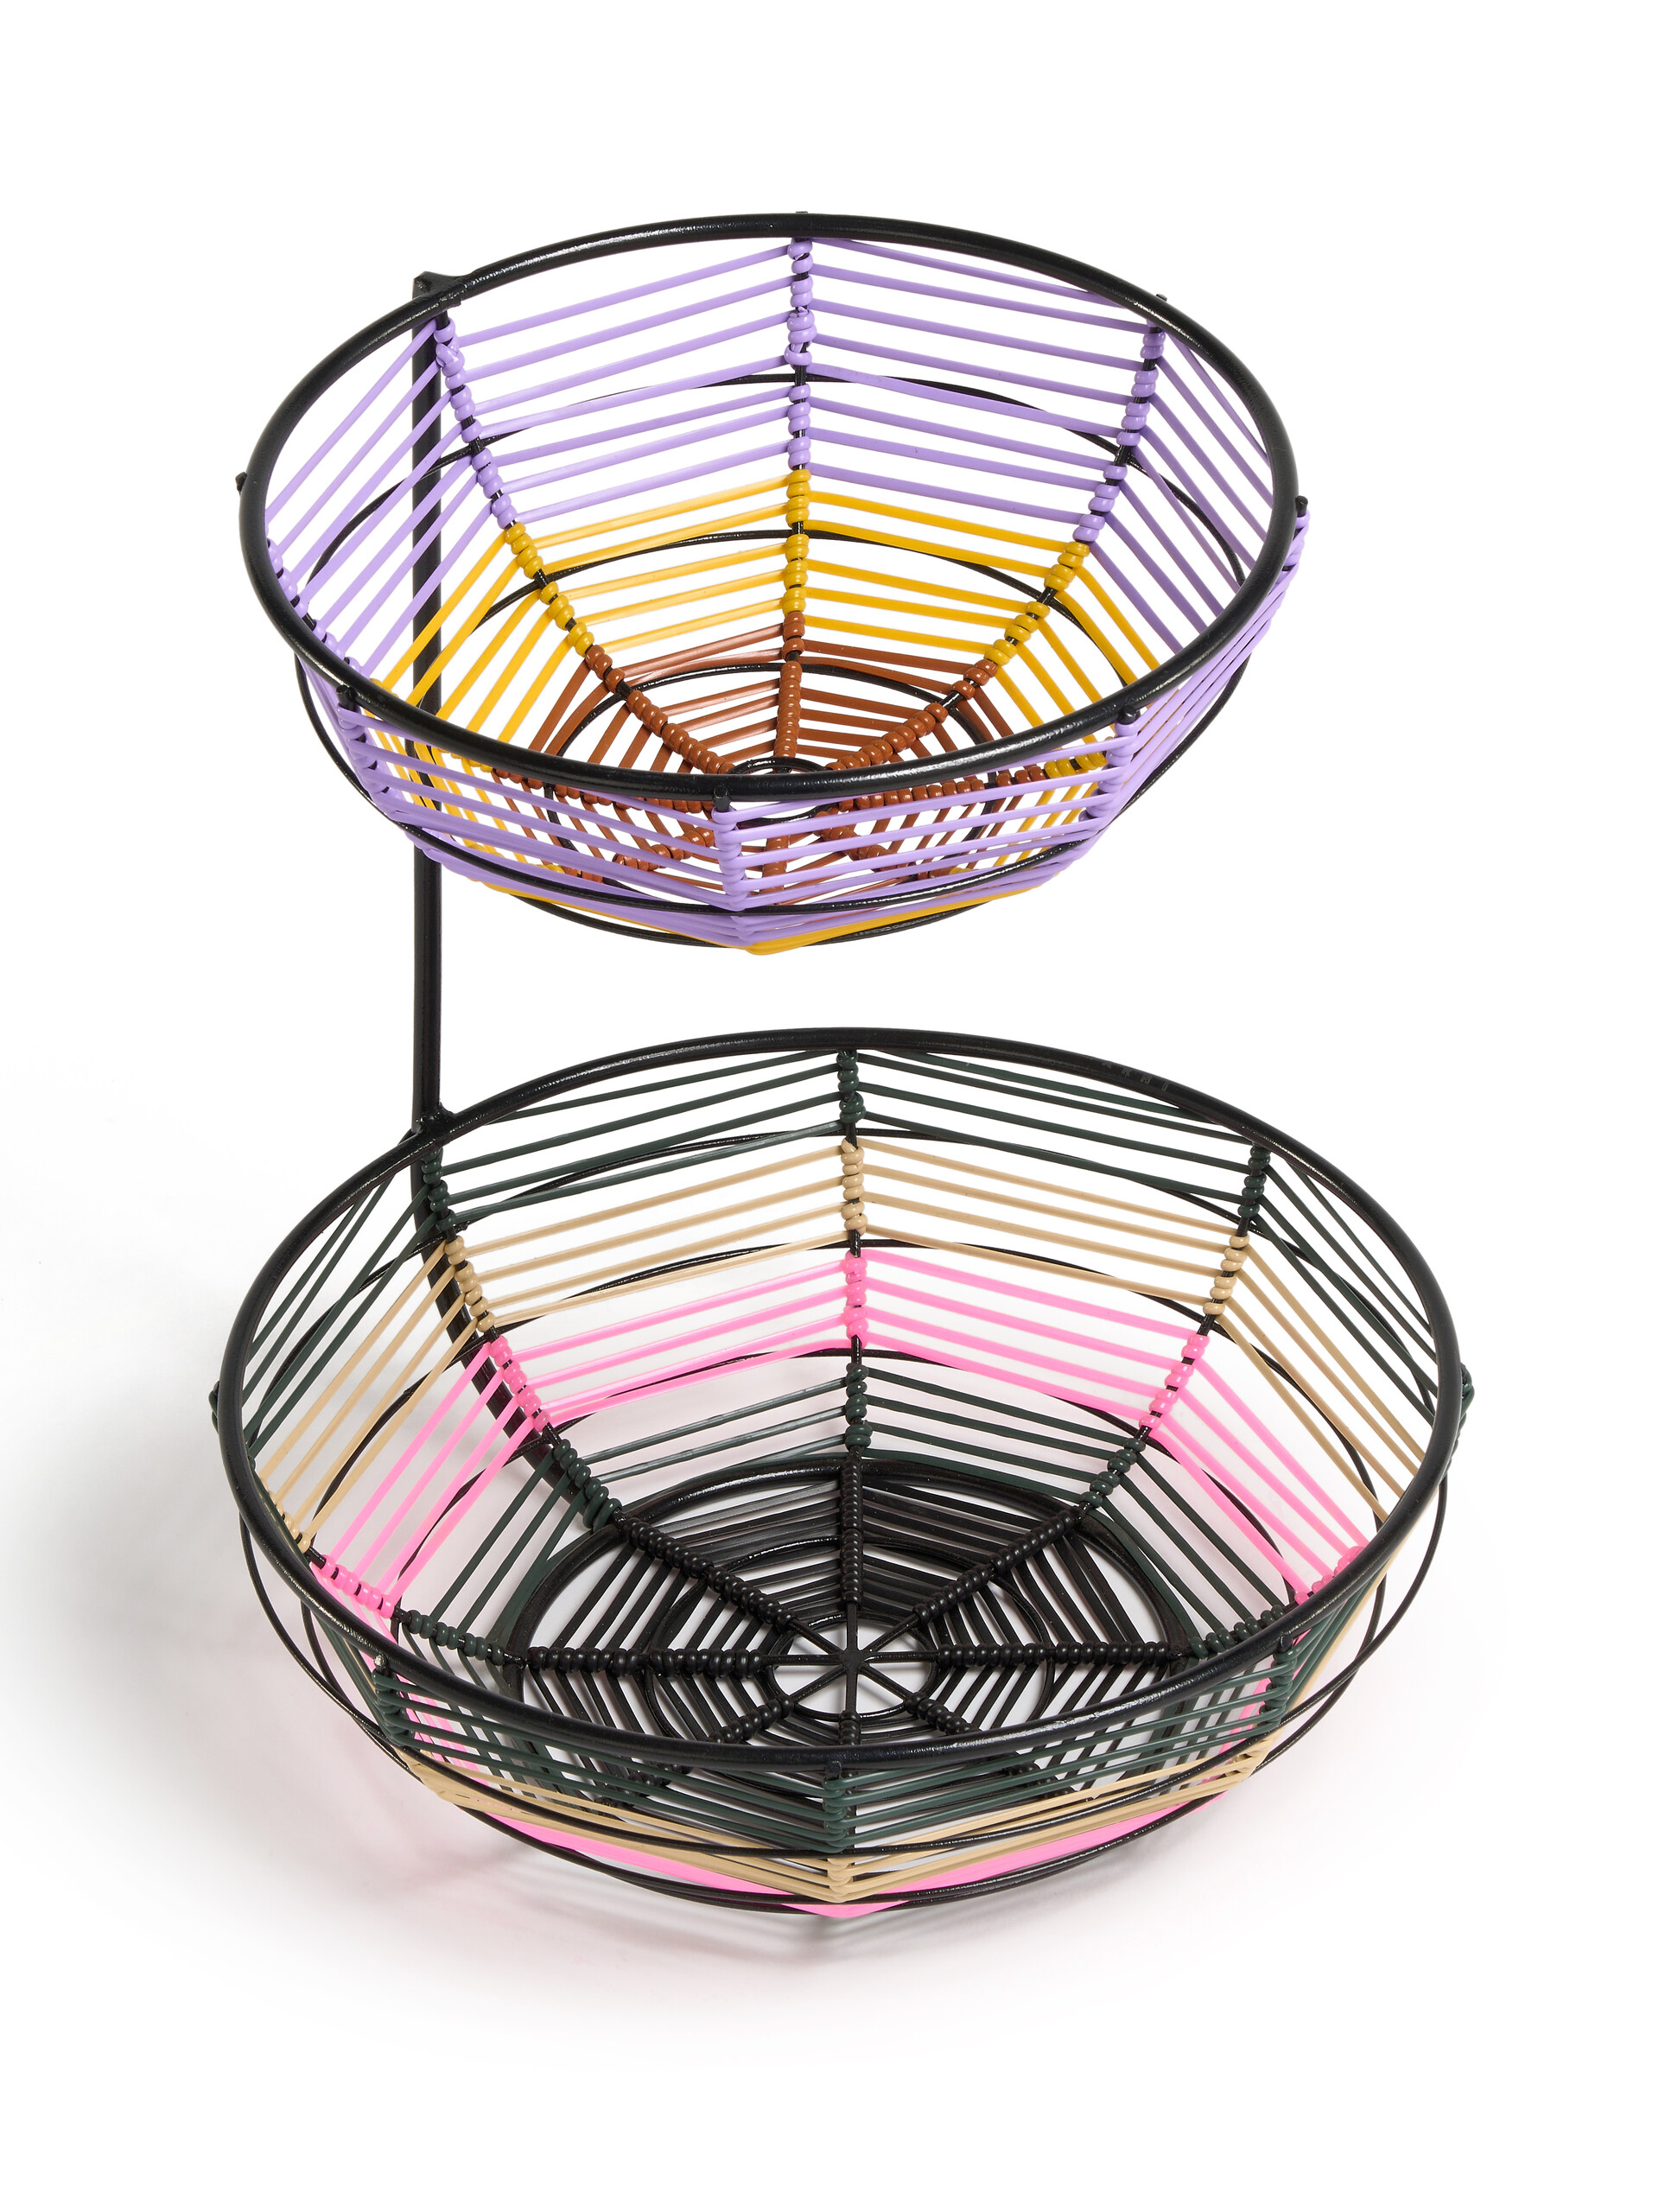 Lilac MARNI MARKET two-tier woven cable fruit stand - Accessories - Image 3